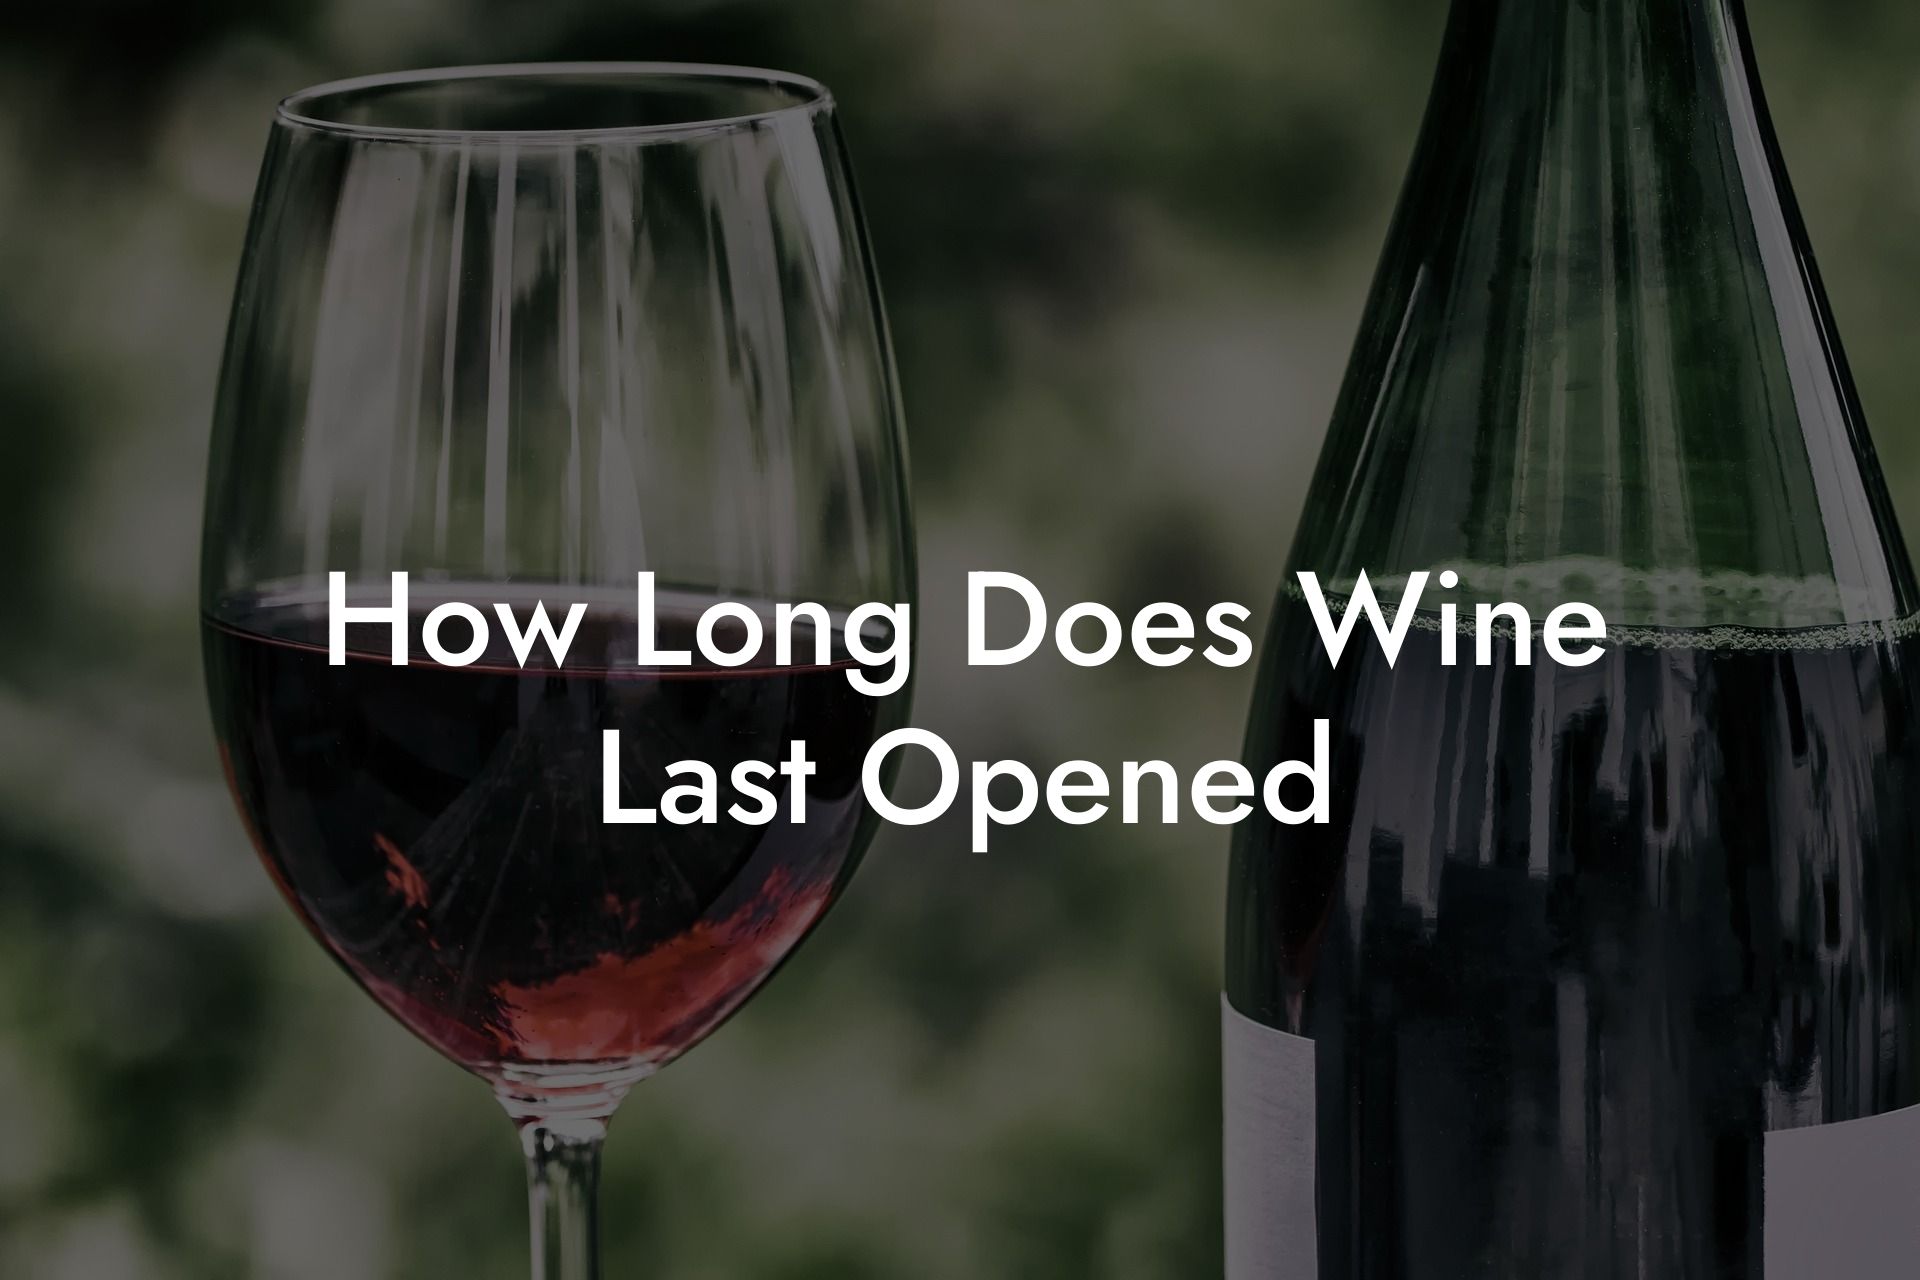 How Long Does Wine Last Opened